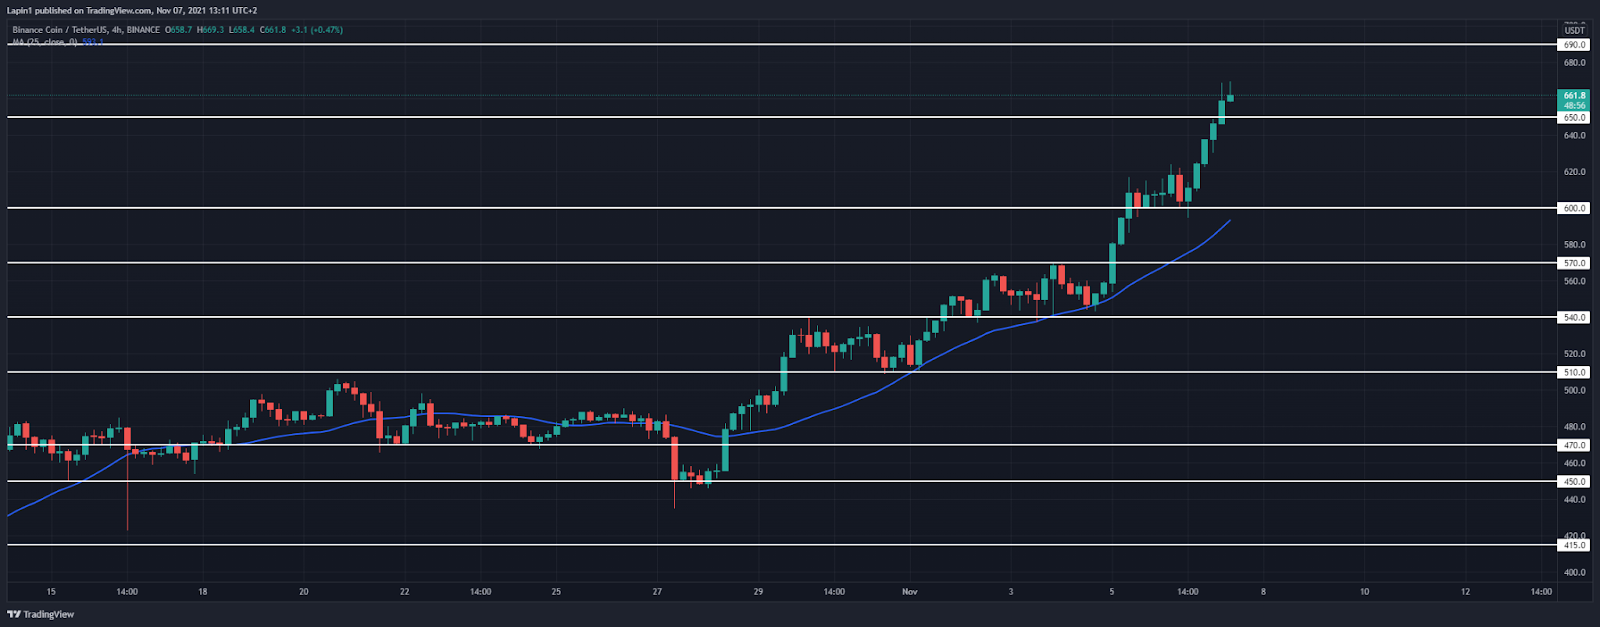 Binance Coin Price Analysis: BNB clears $650, targets the $690 all-time high next?